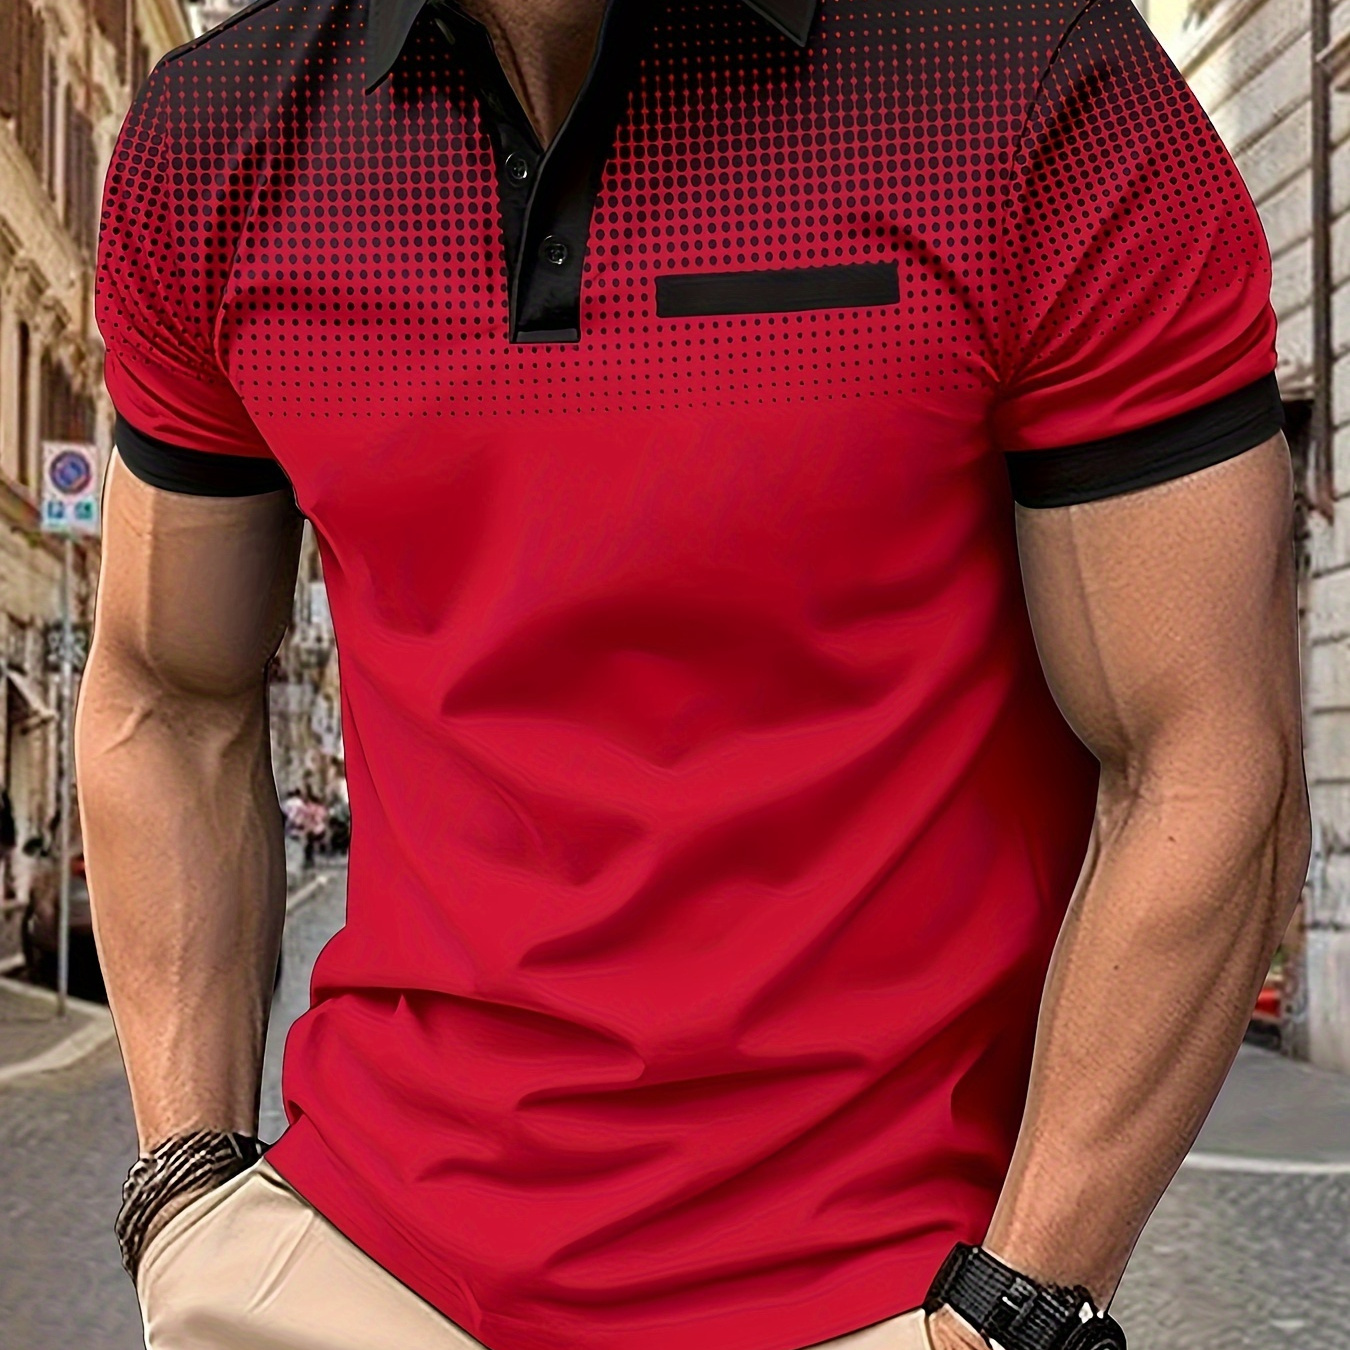 

Men's Short-sleeved Lapel Polo T-shirts With Gradient Print, Versatile For Sports And Casual Wear